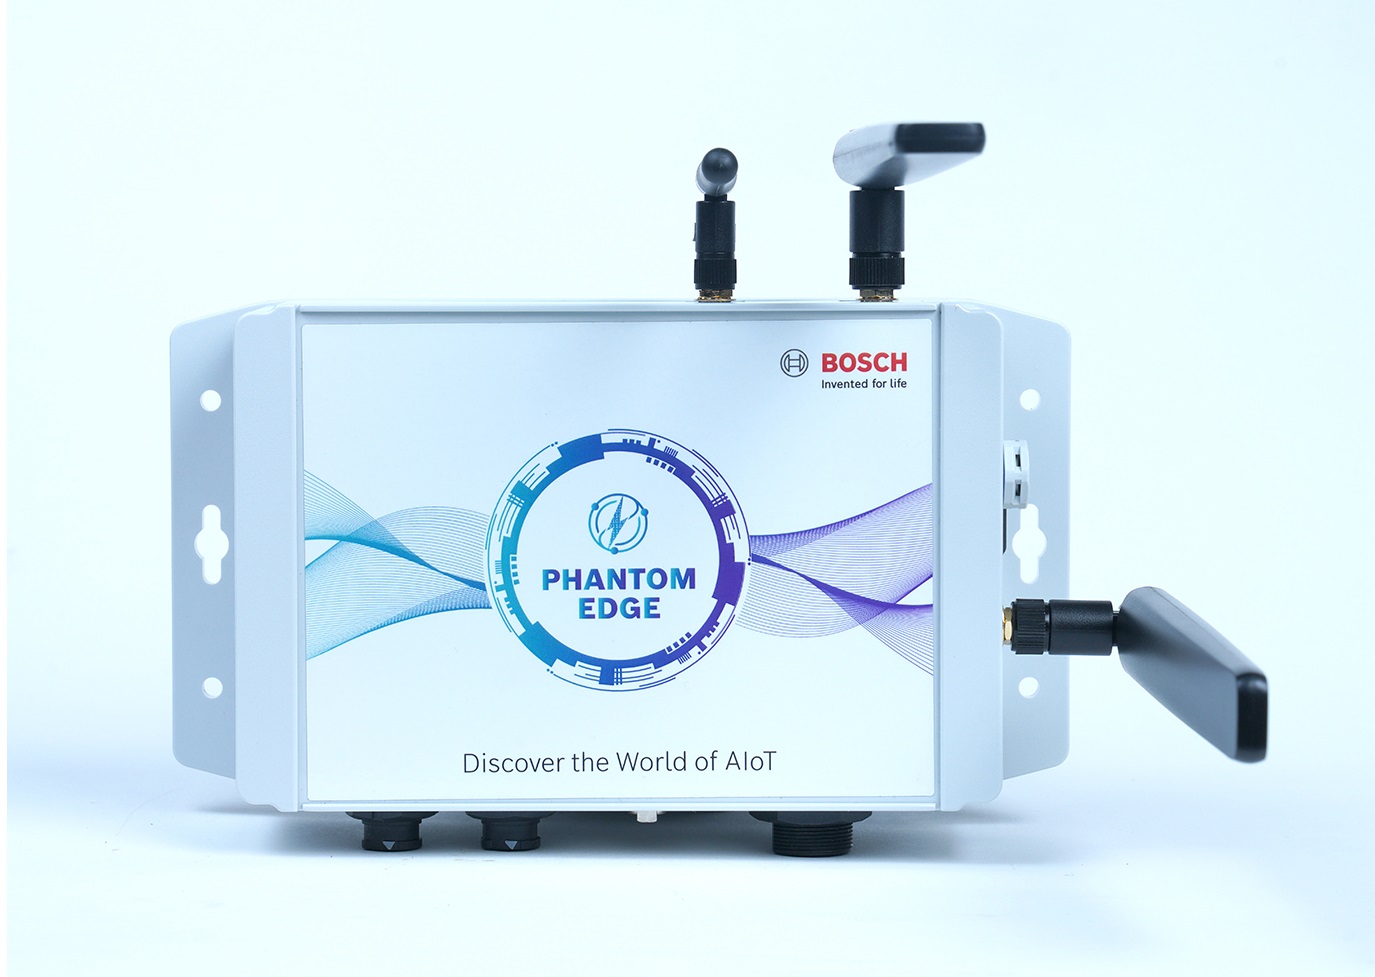 Image for Bosch Launches The New Phantom Edge In The UAE